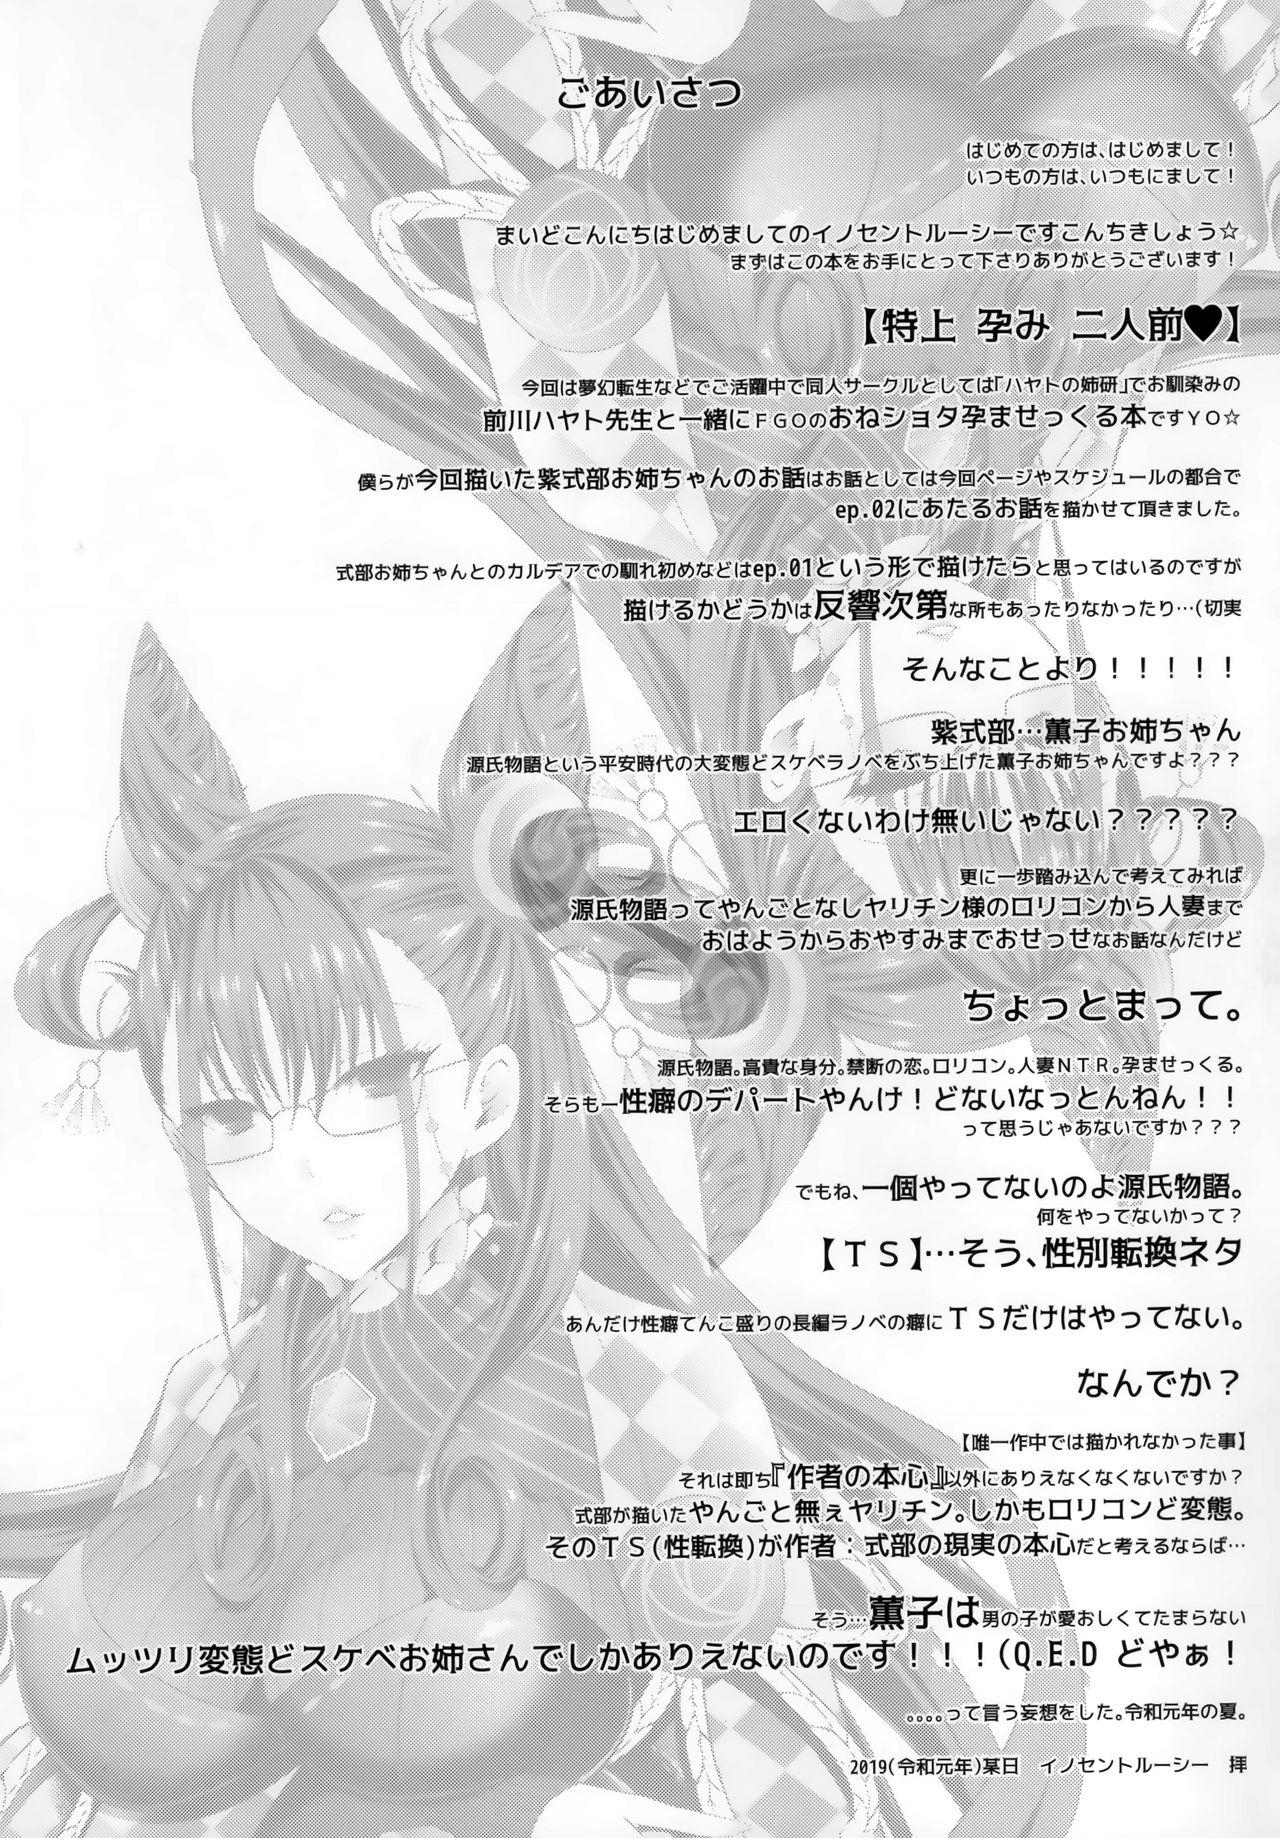 Duro 特上孕み二人前 - Fate grand order Natural - Page 12